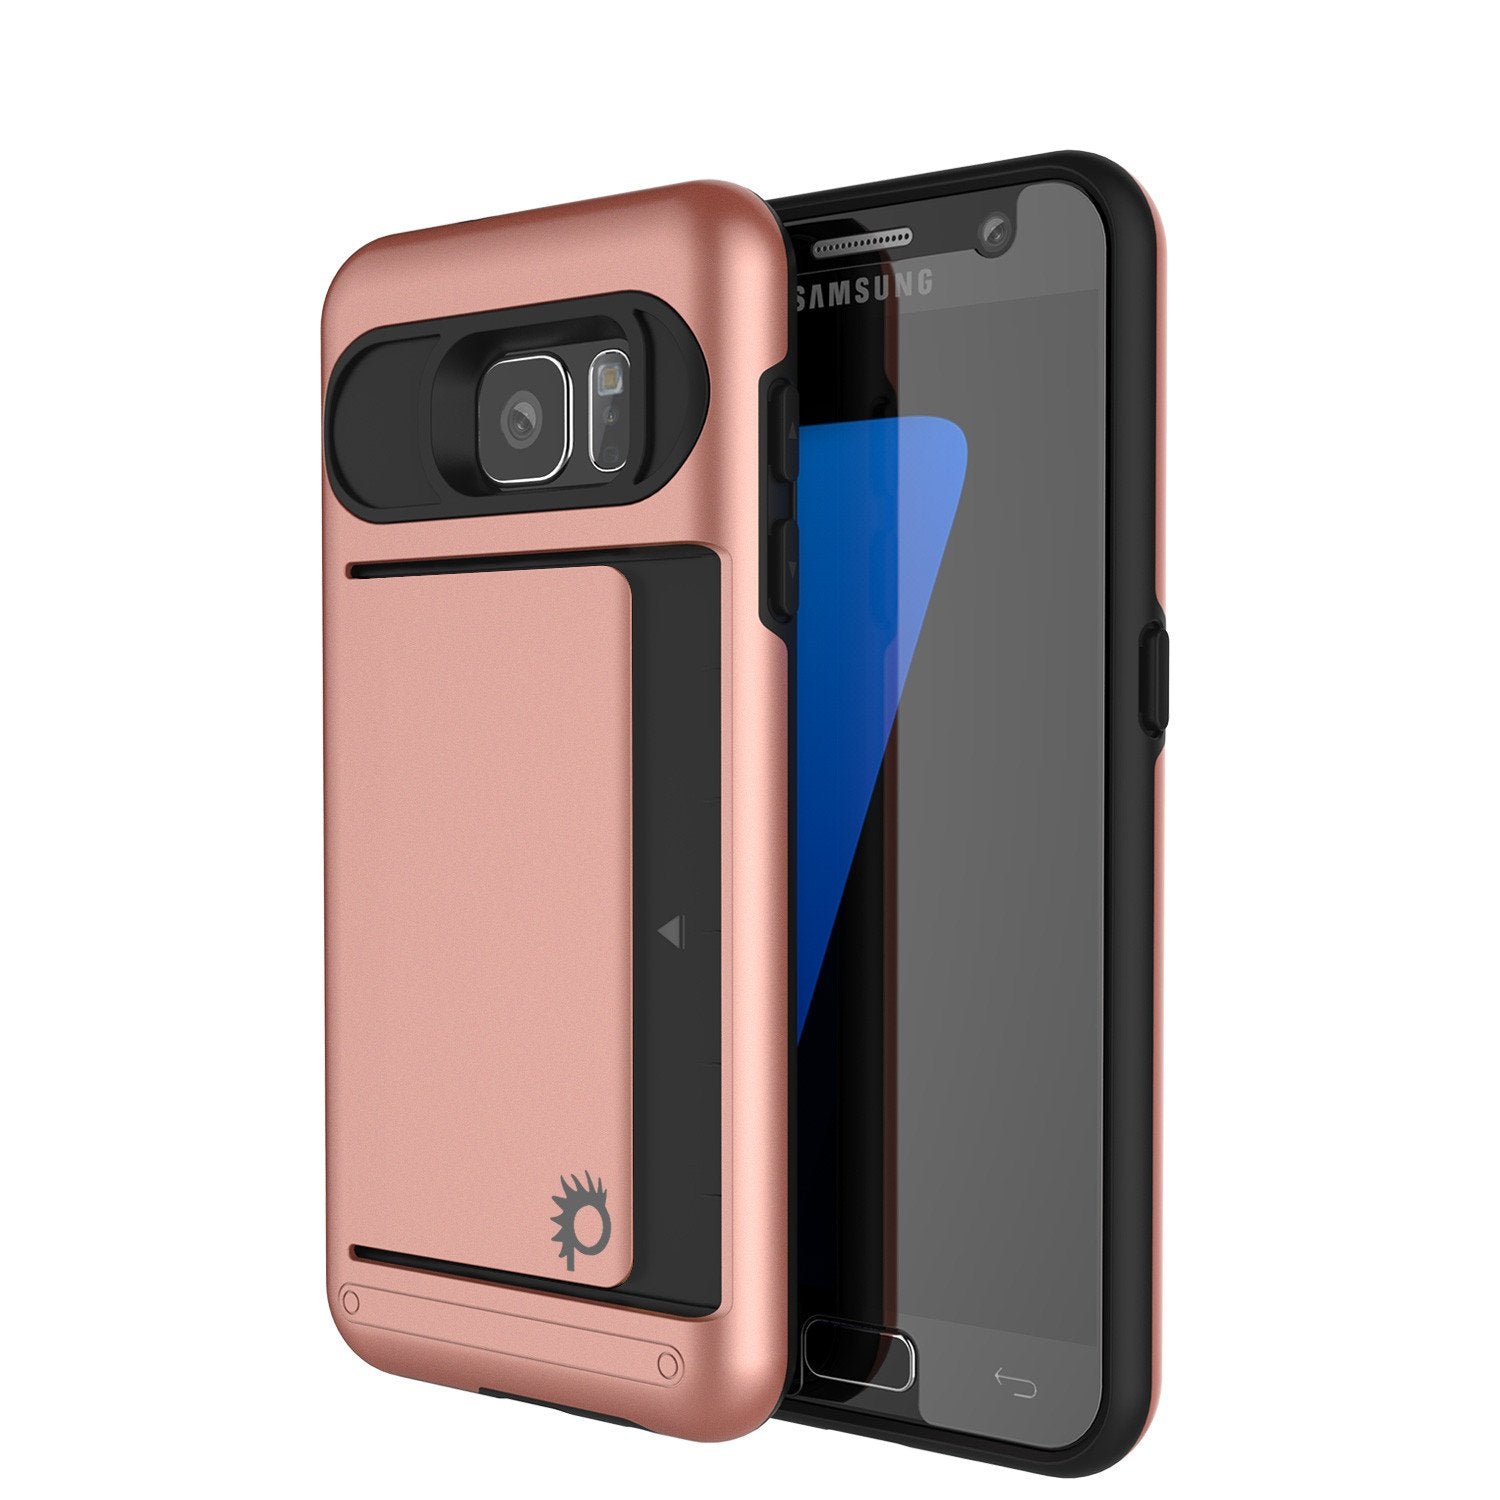 Galaxy s7 Case PunkCase CLUTCH Rose Gold Series Slim Armor Soft Cover Case w/ Tempered Glass